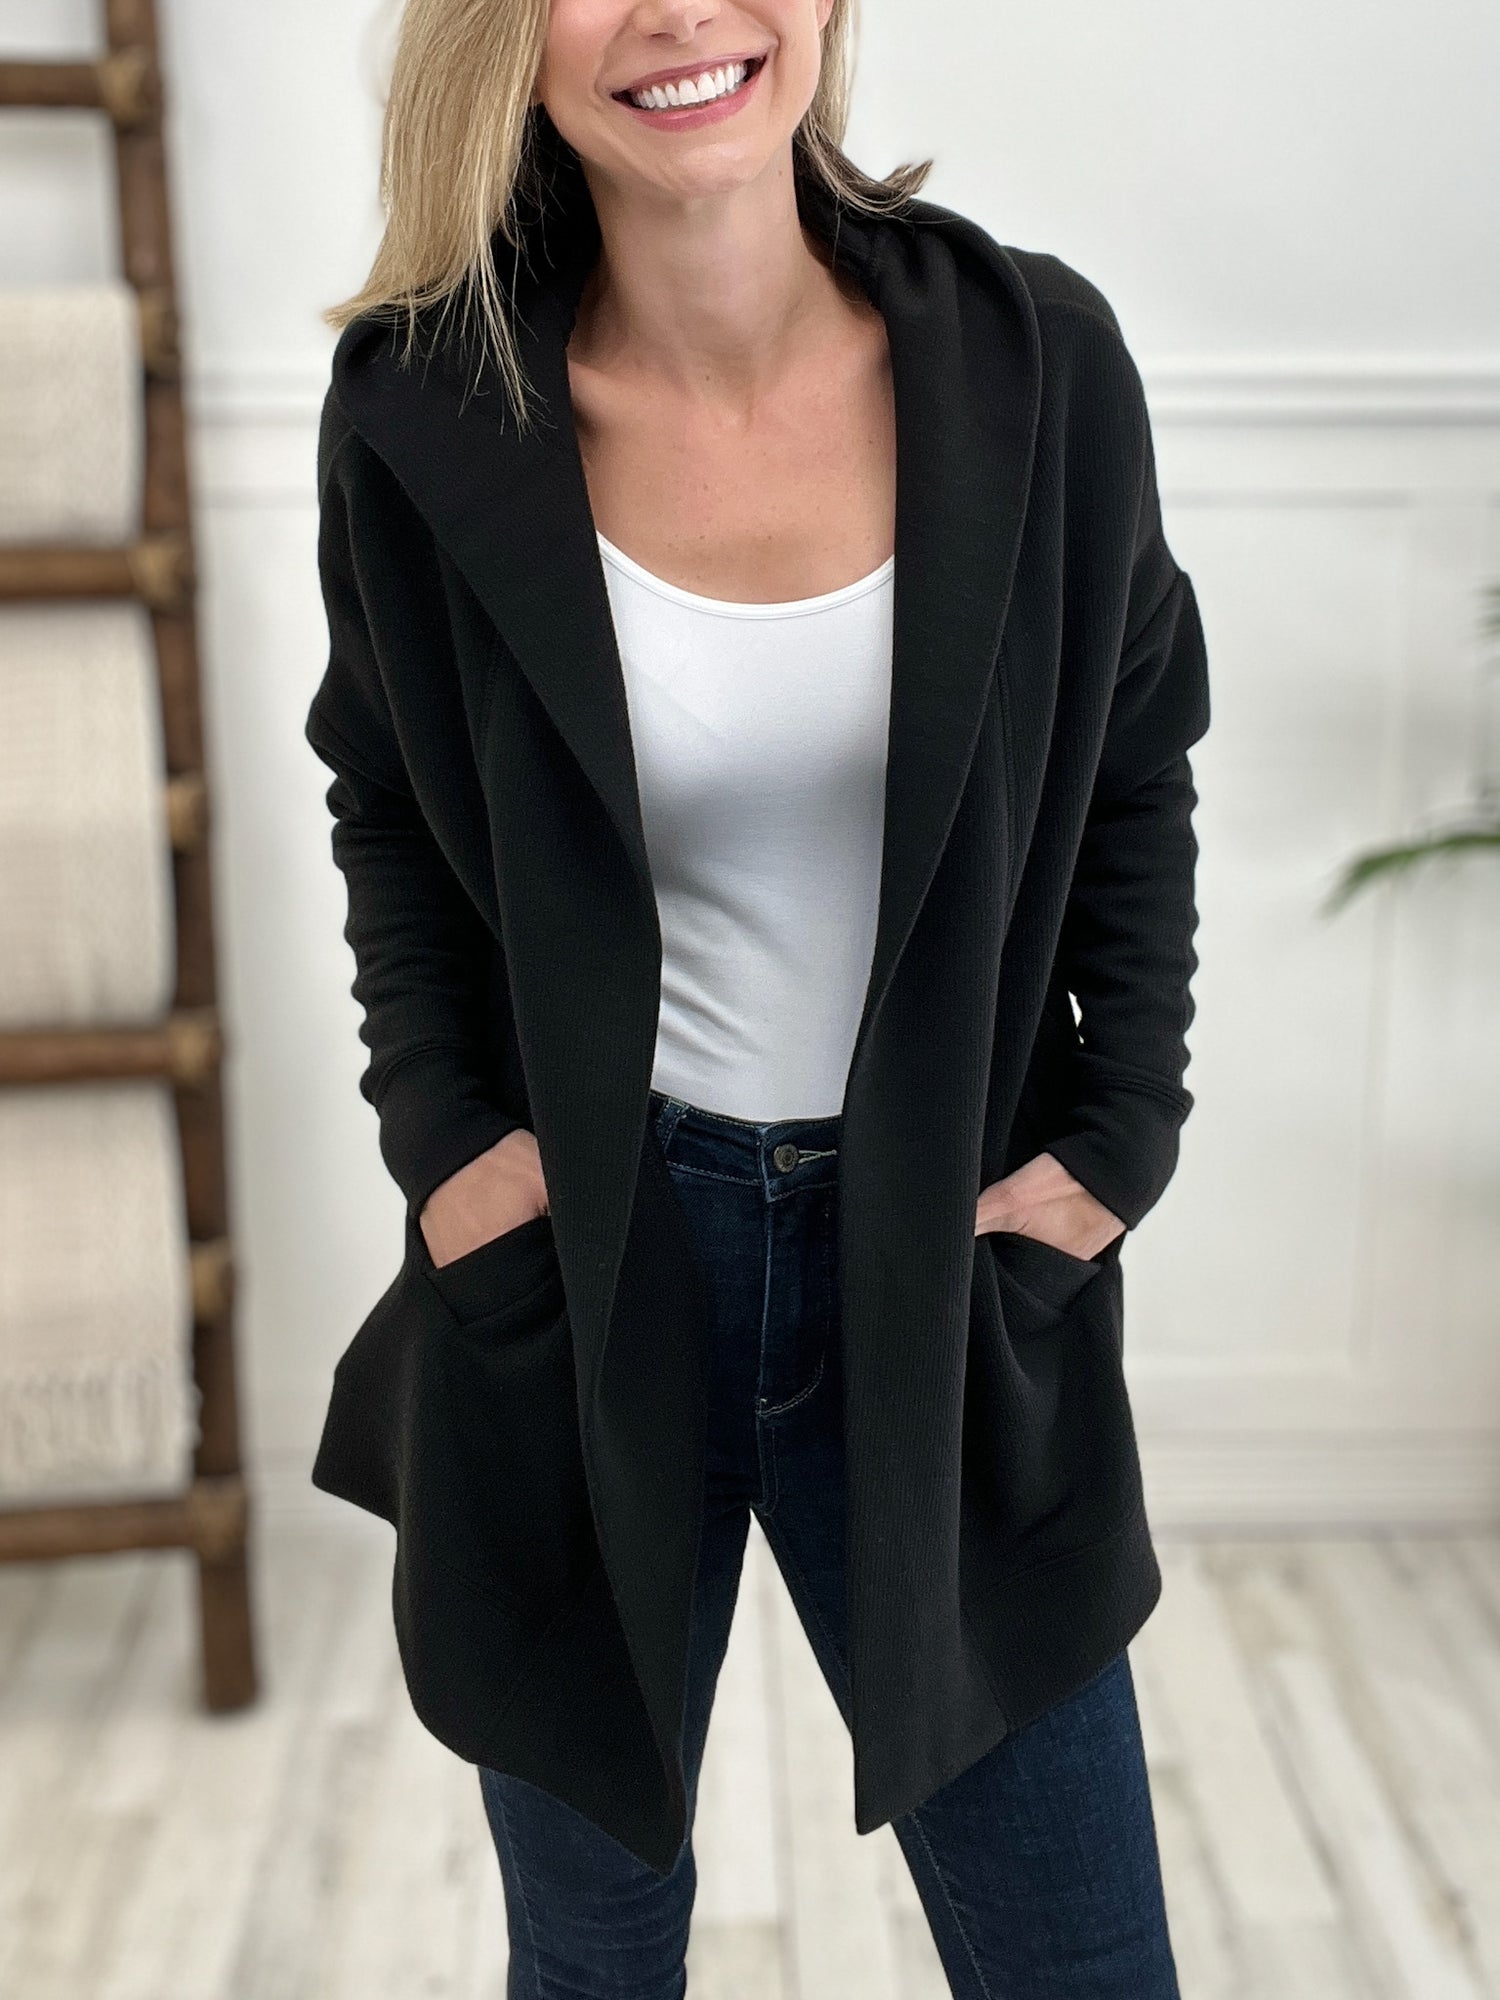 The Cozy Complement Cardigan